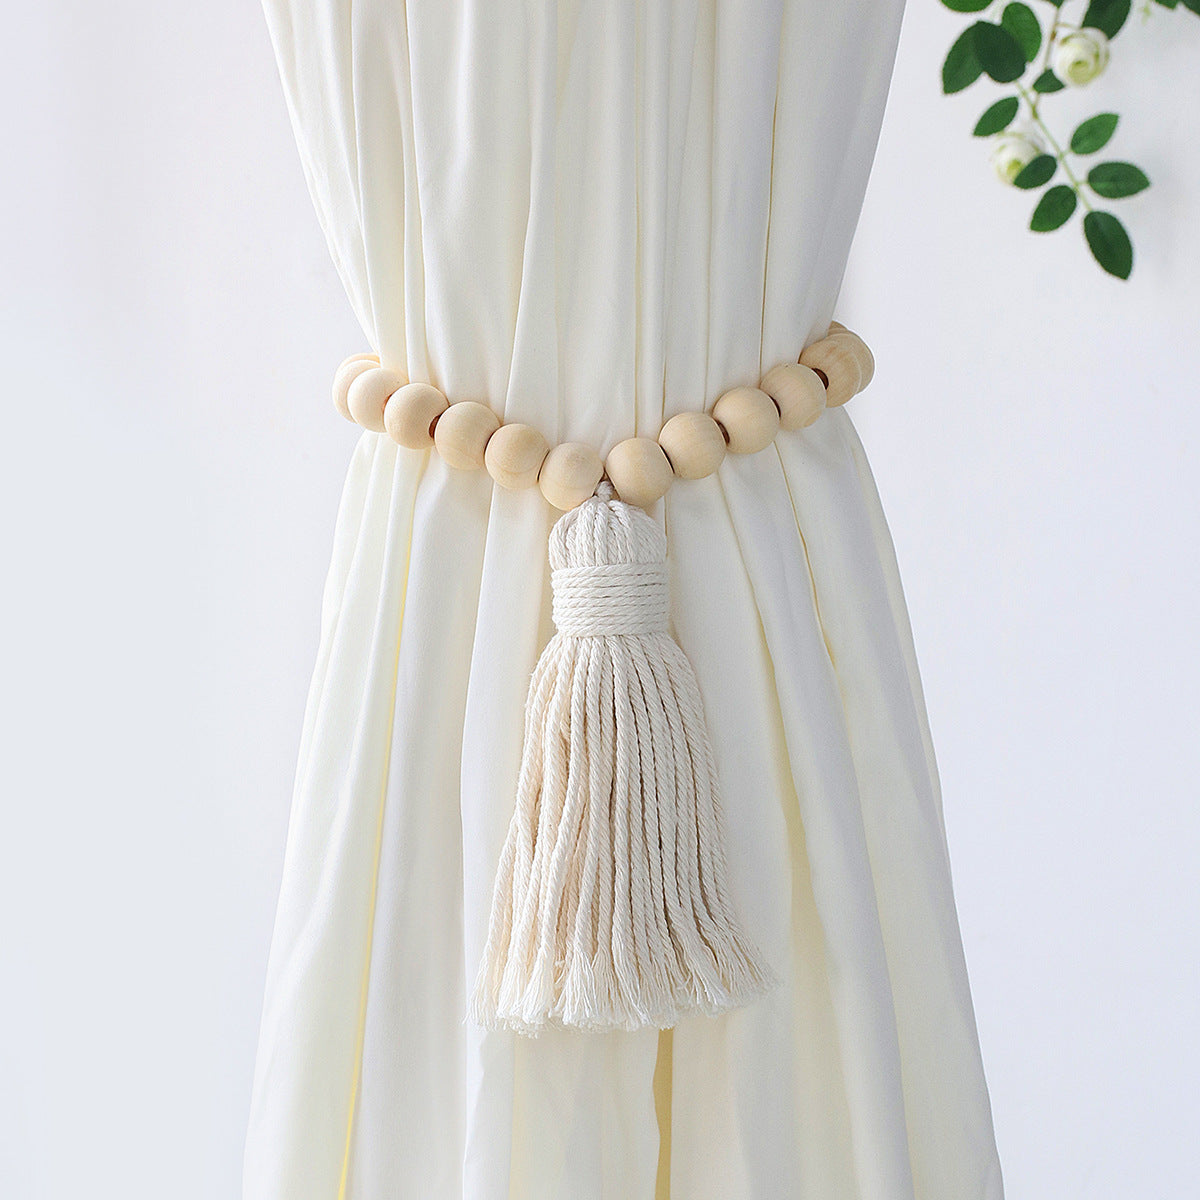 Curtain Straps Hand-woven Cotton Rope Ornaments